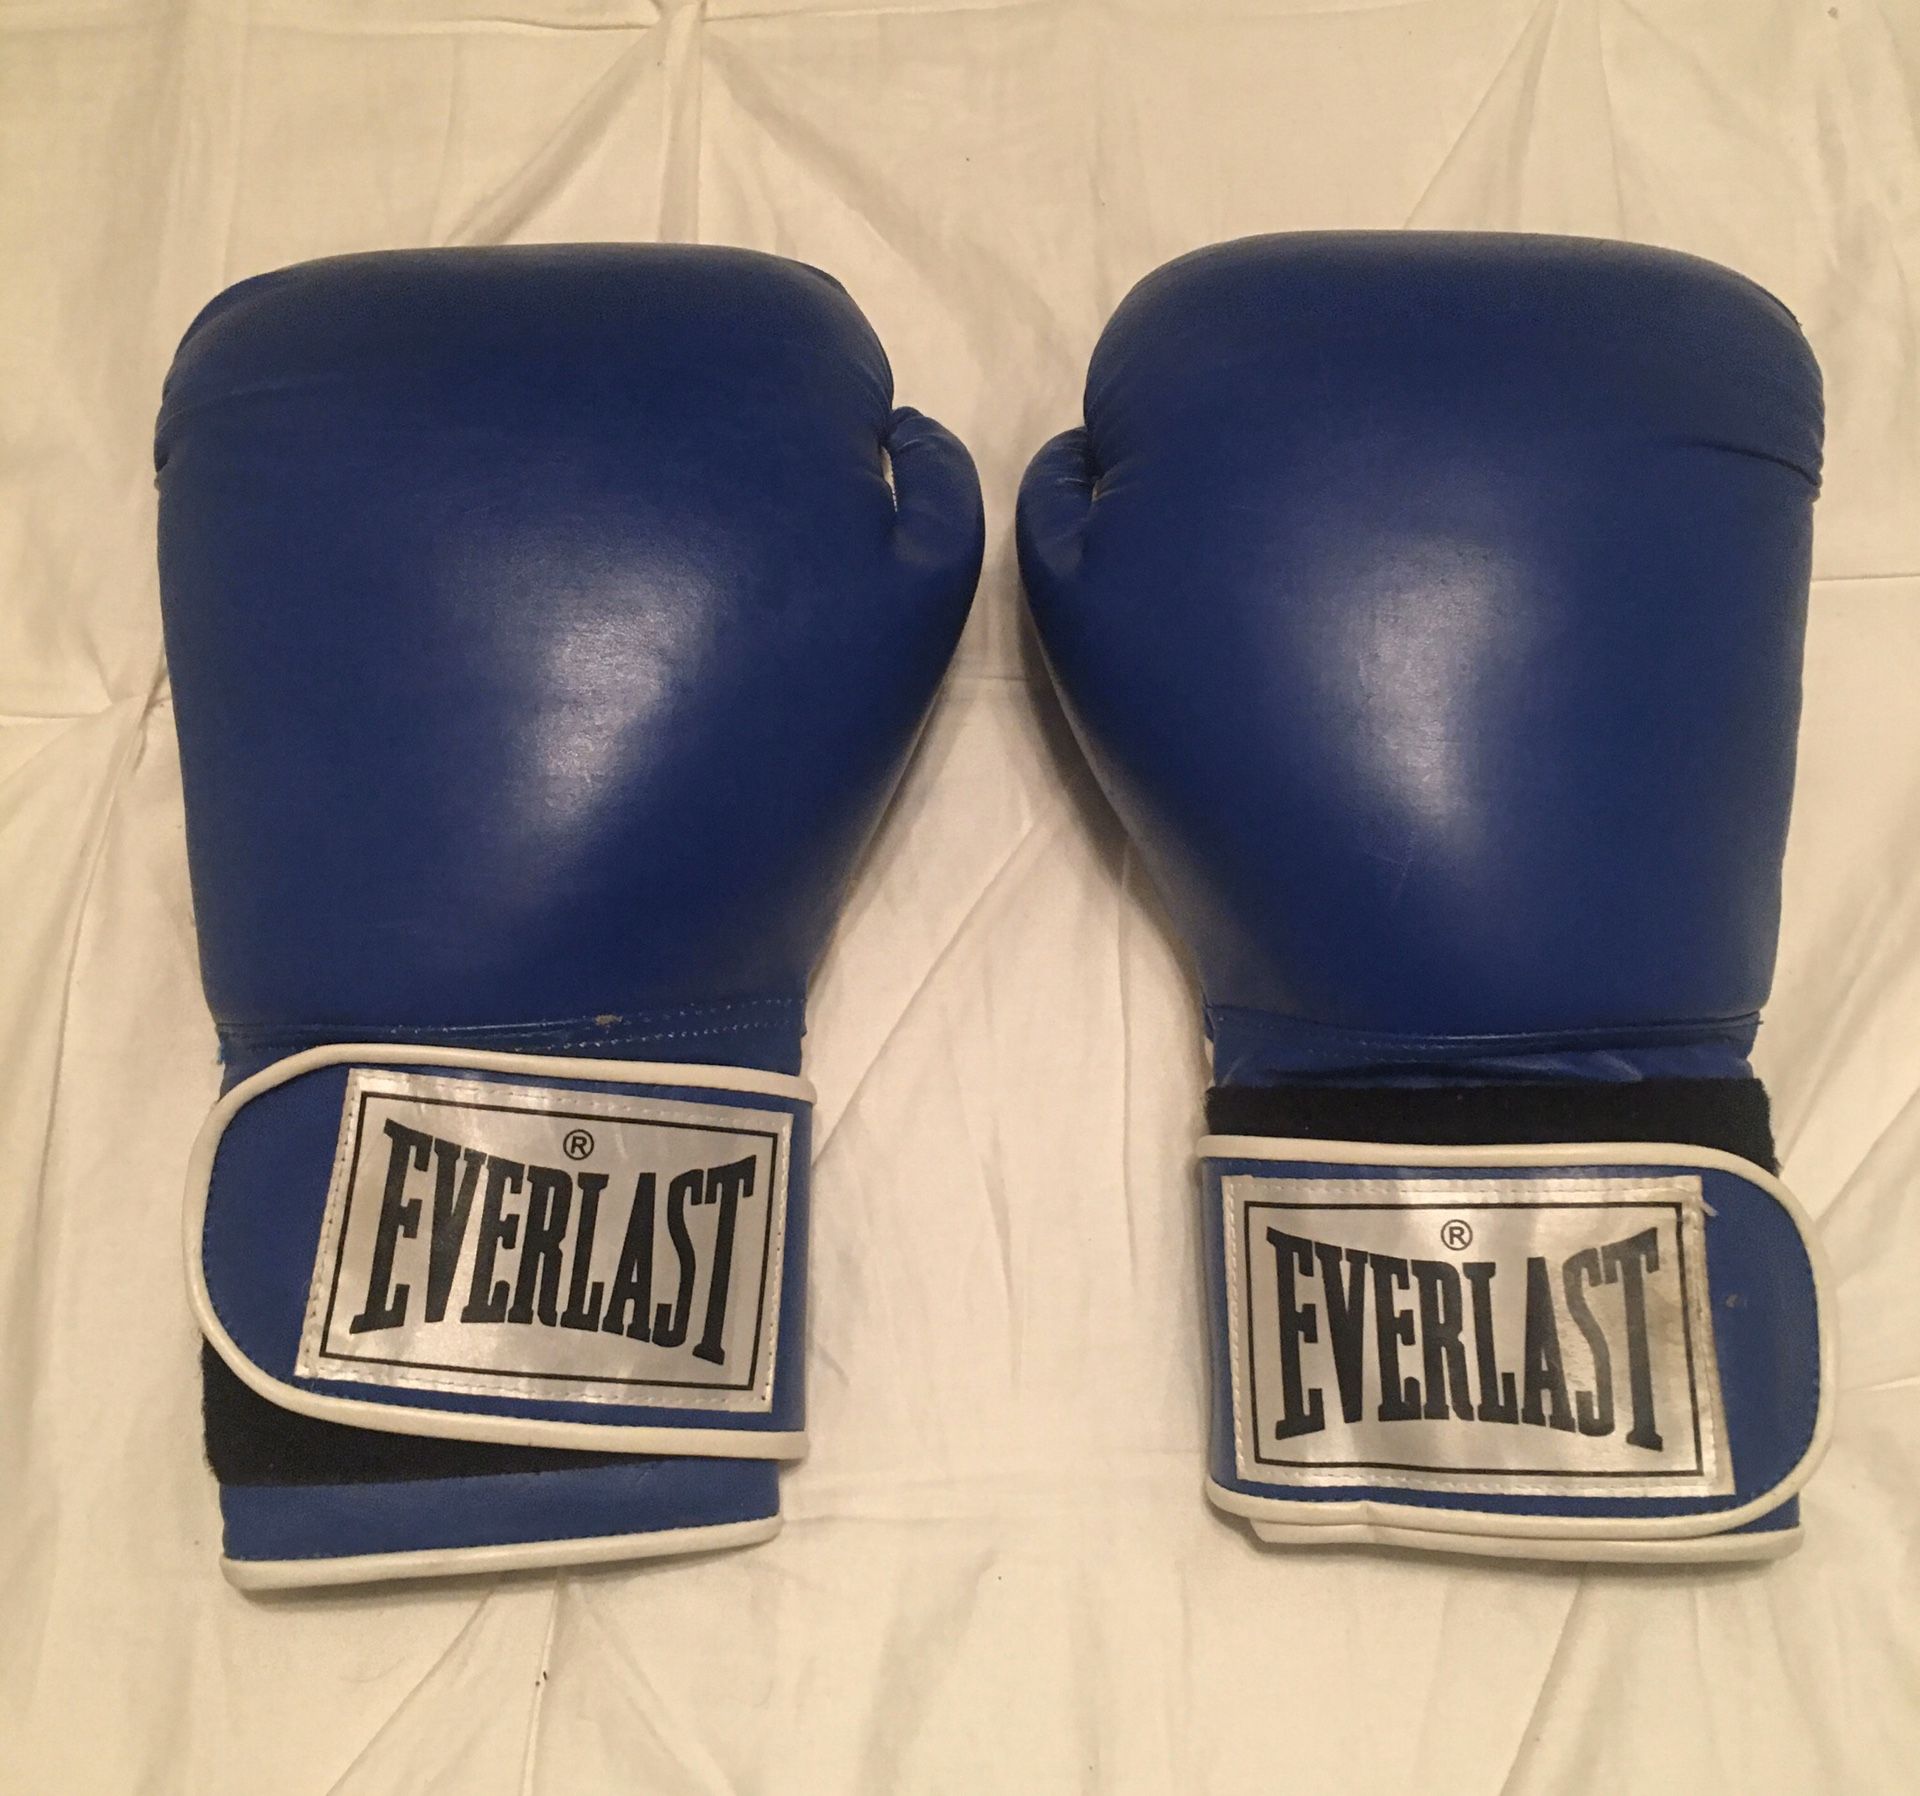 Everlast 16 Ounce Boxing Gloves Blue/White EXCELLENT Condition.